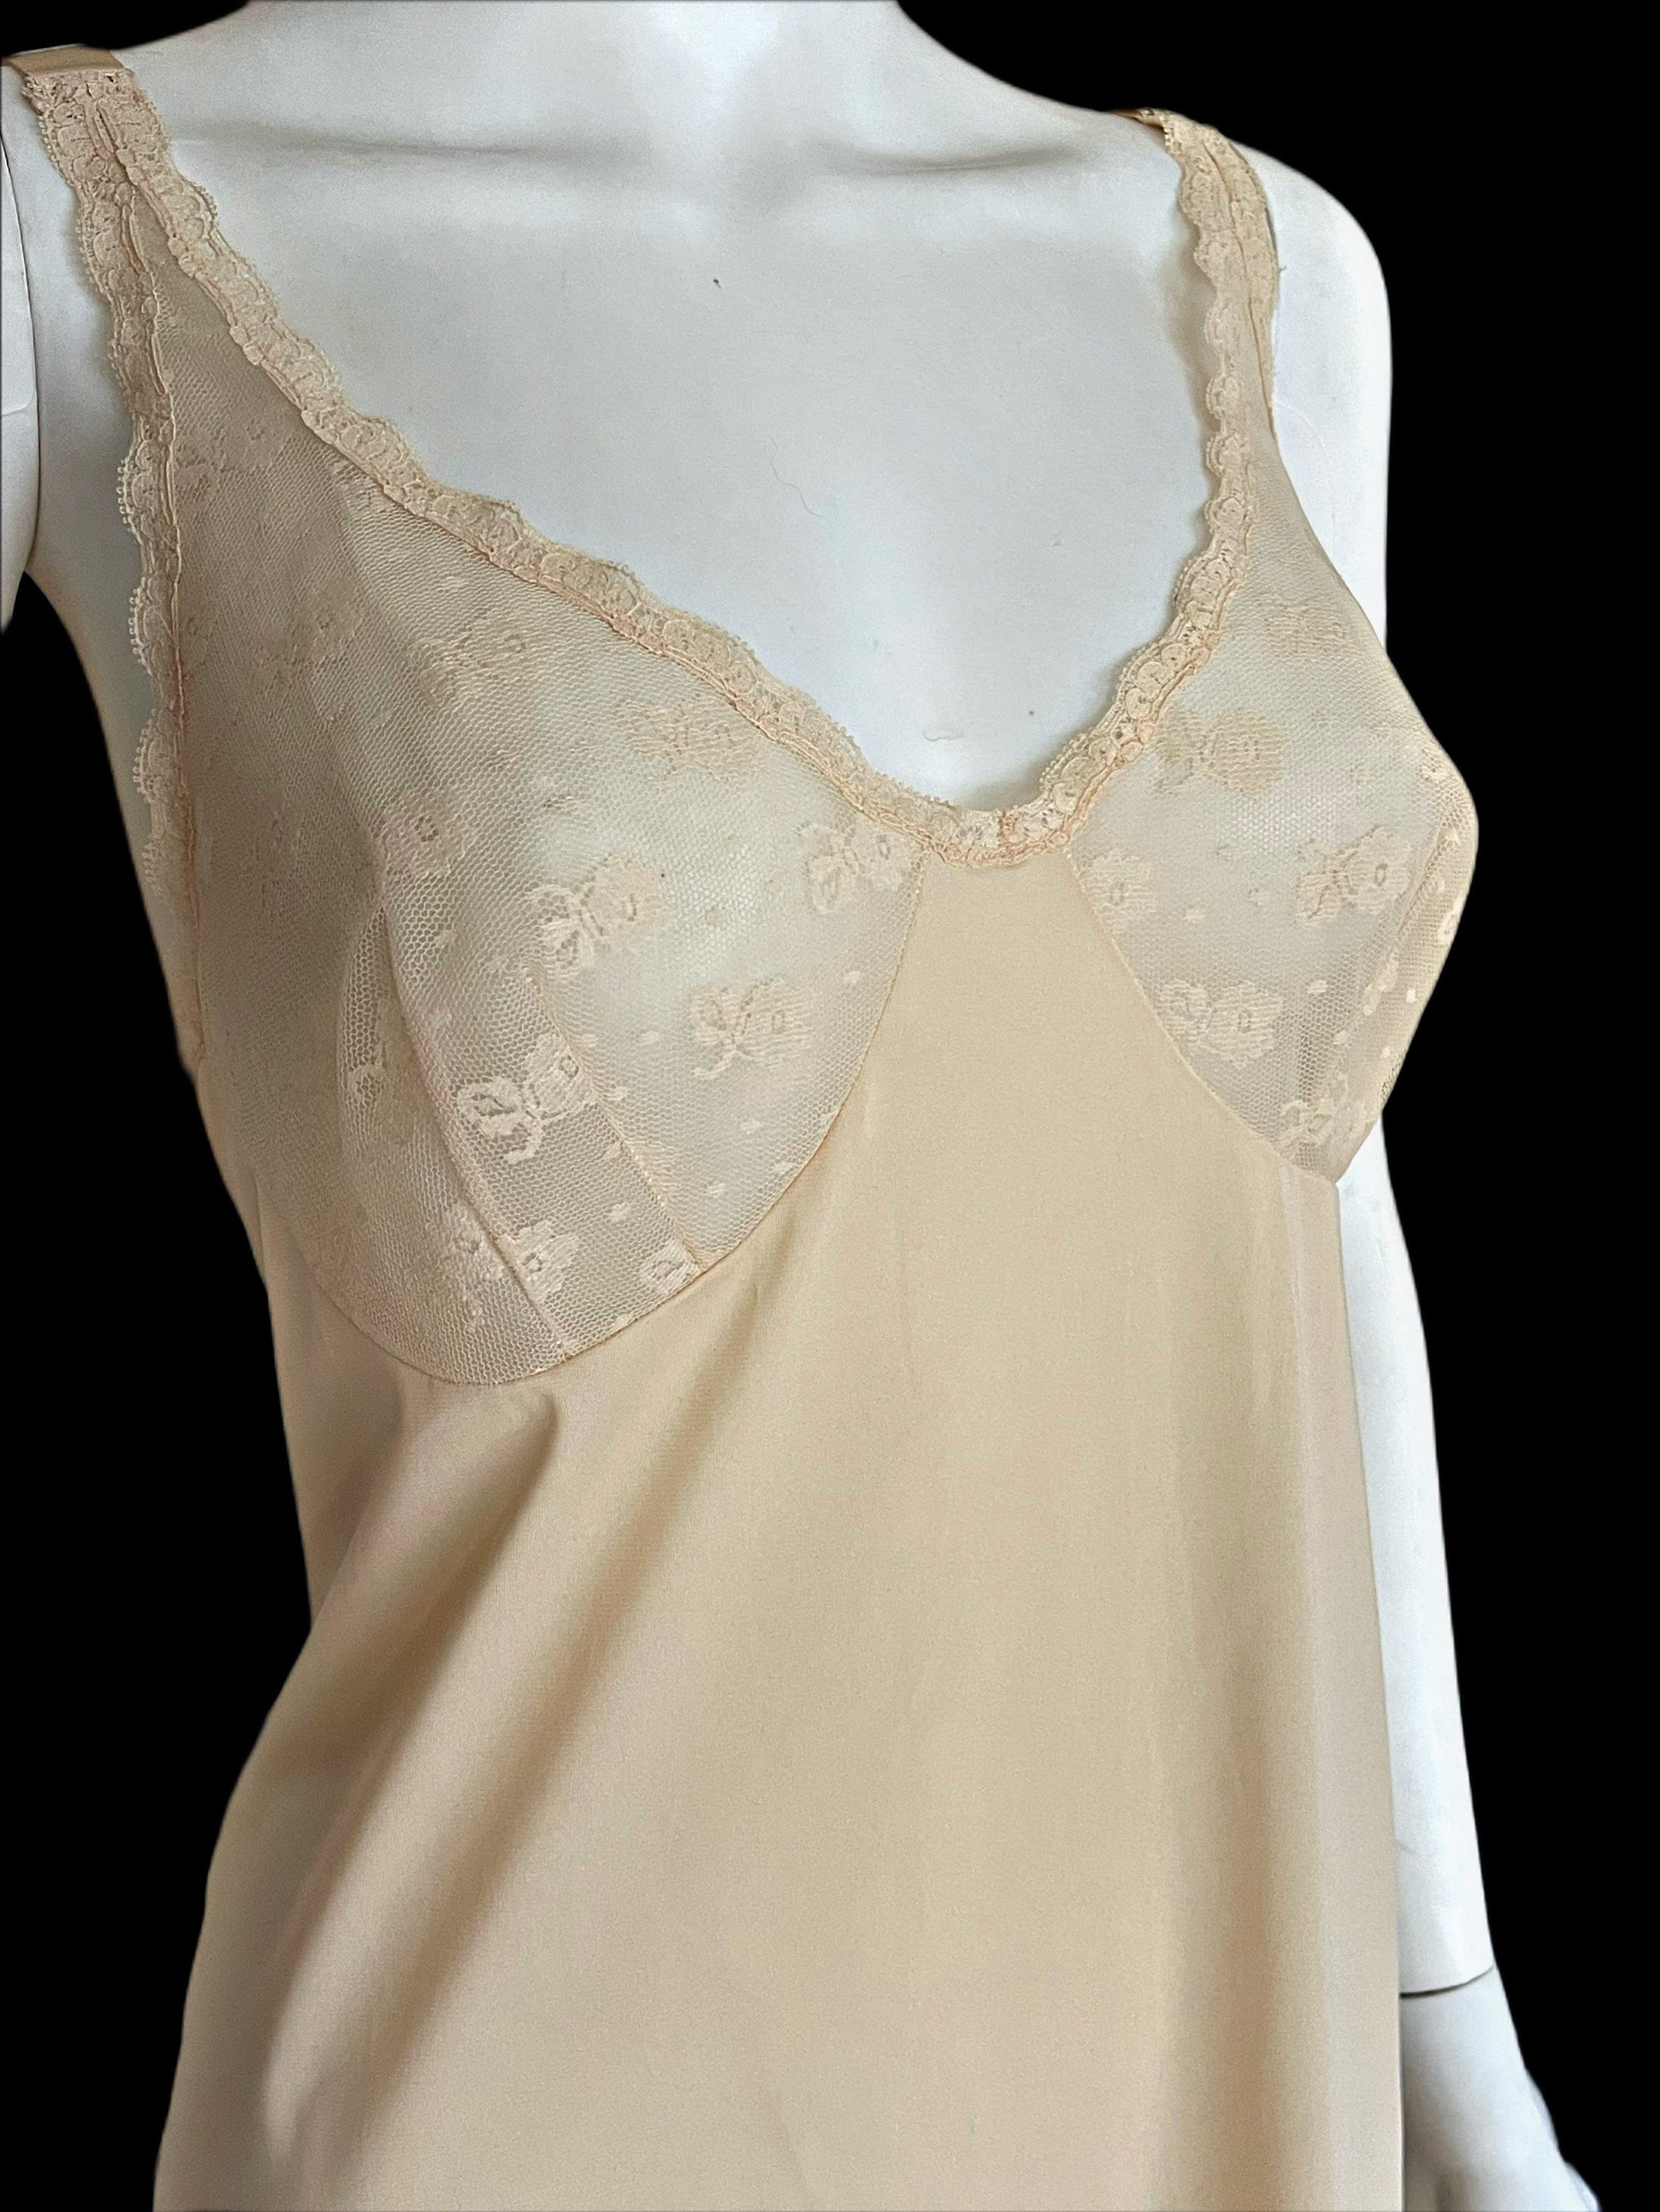 Sheer mesh nightgown slip with lace cups and scalloped hemline